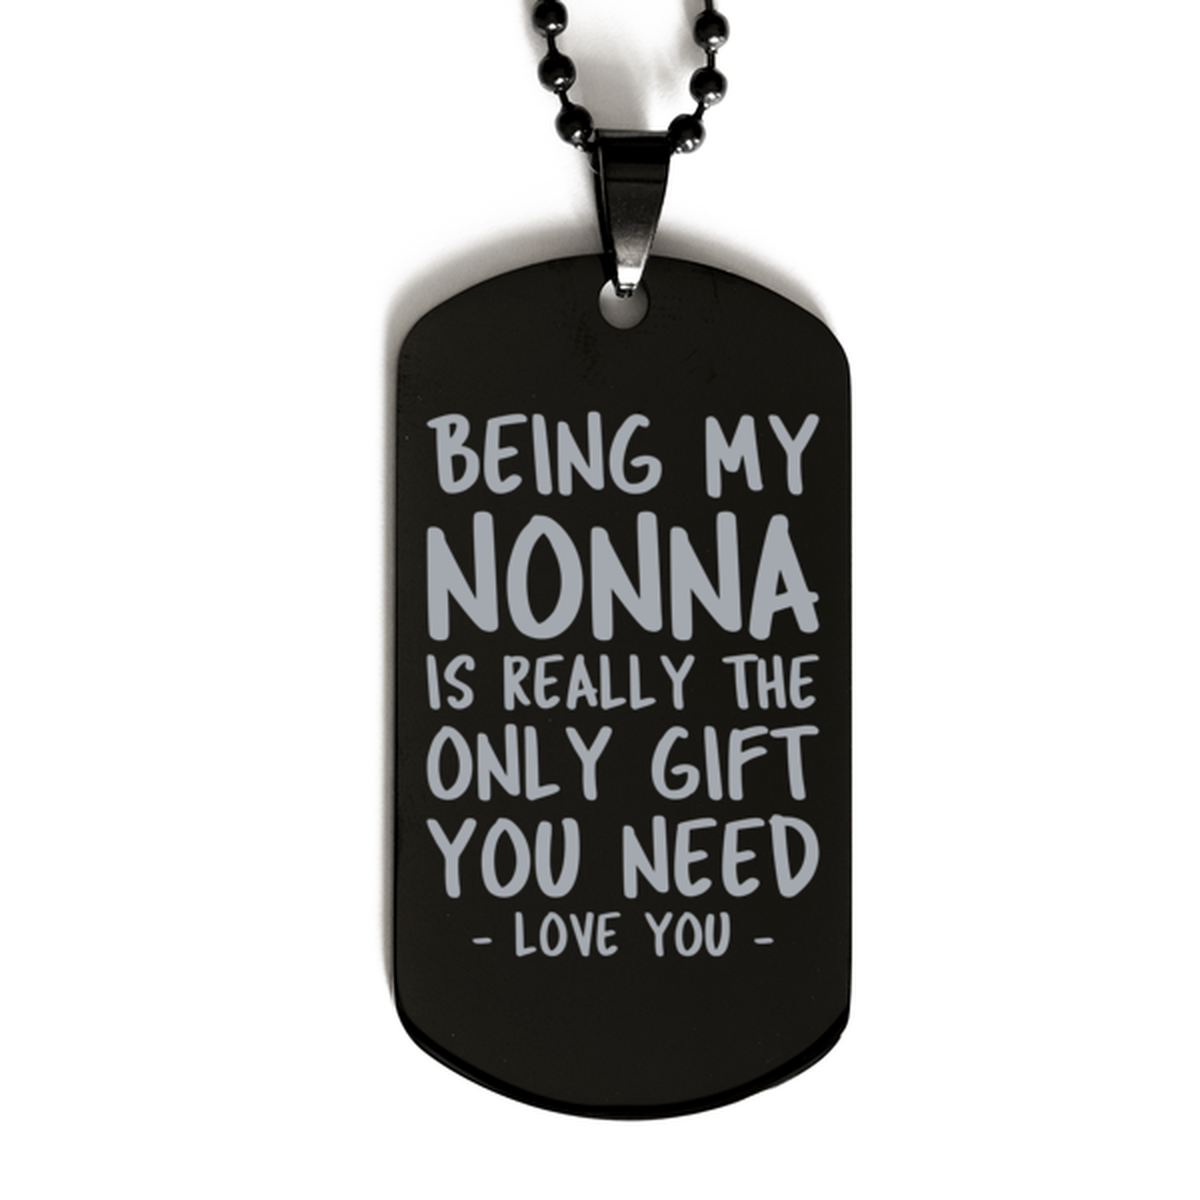 Funny Nonna Black Dog Tag Necklace, Being My Nonna Is Really the Only Gift You Need, Best Birthday Gifts for Nonna